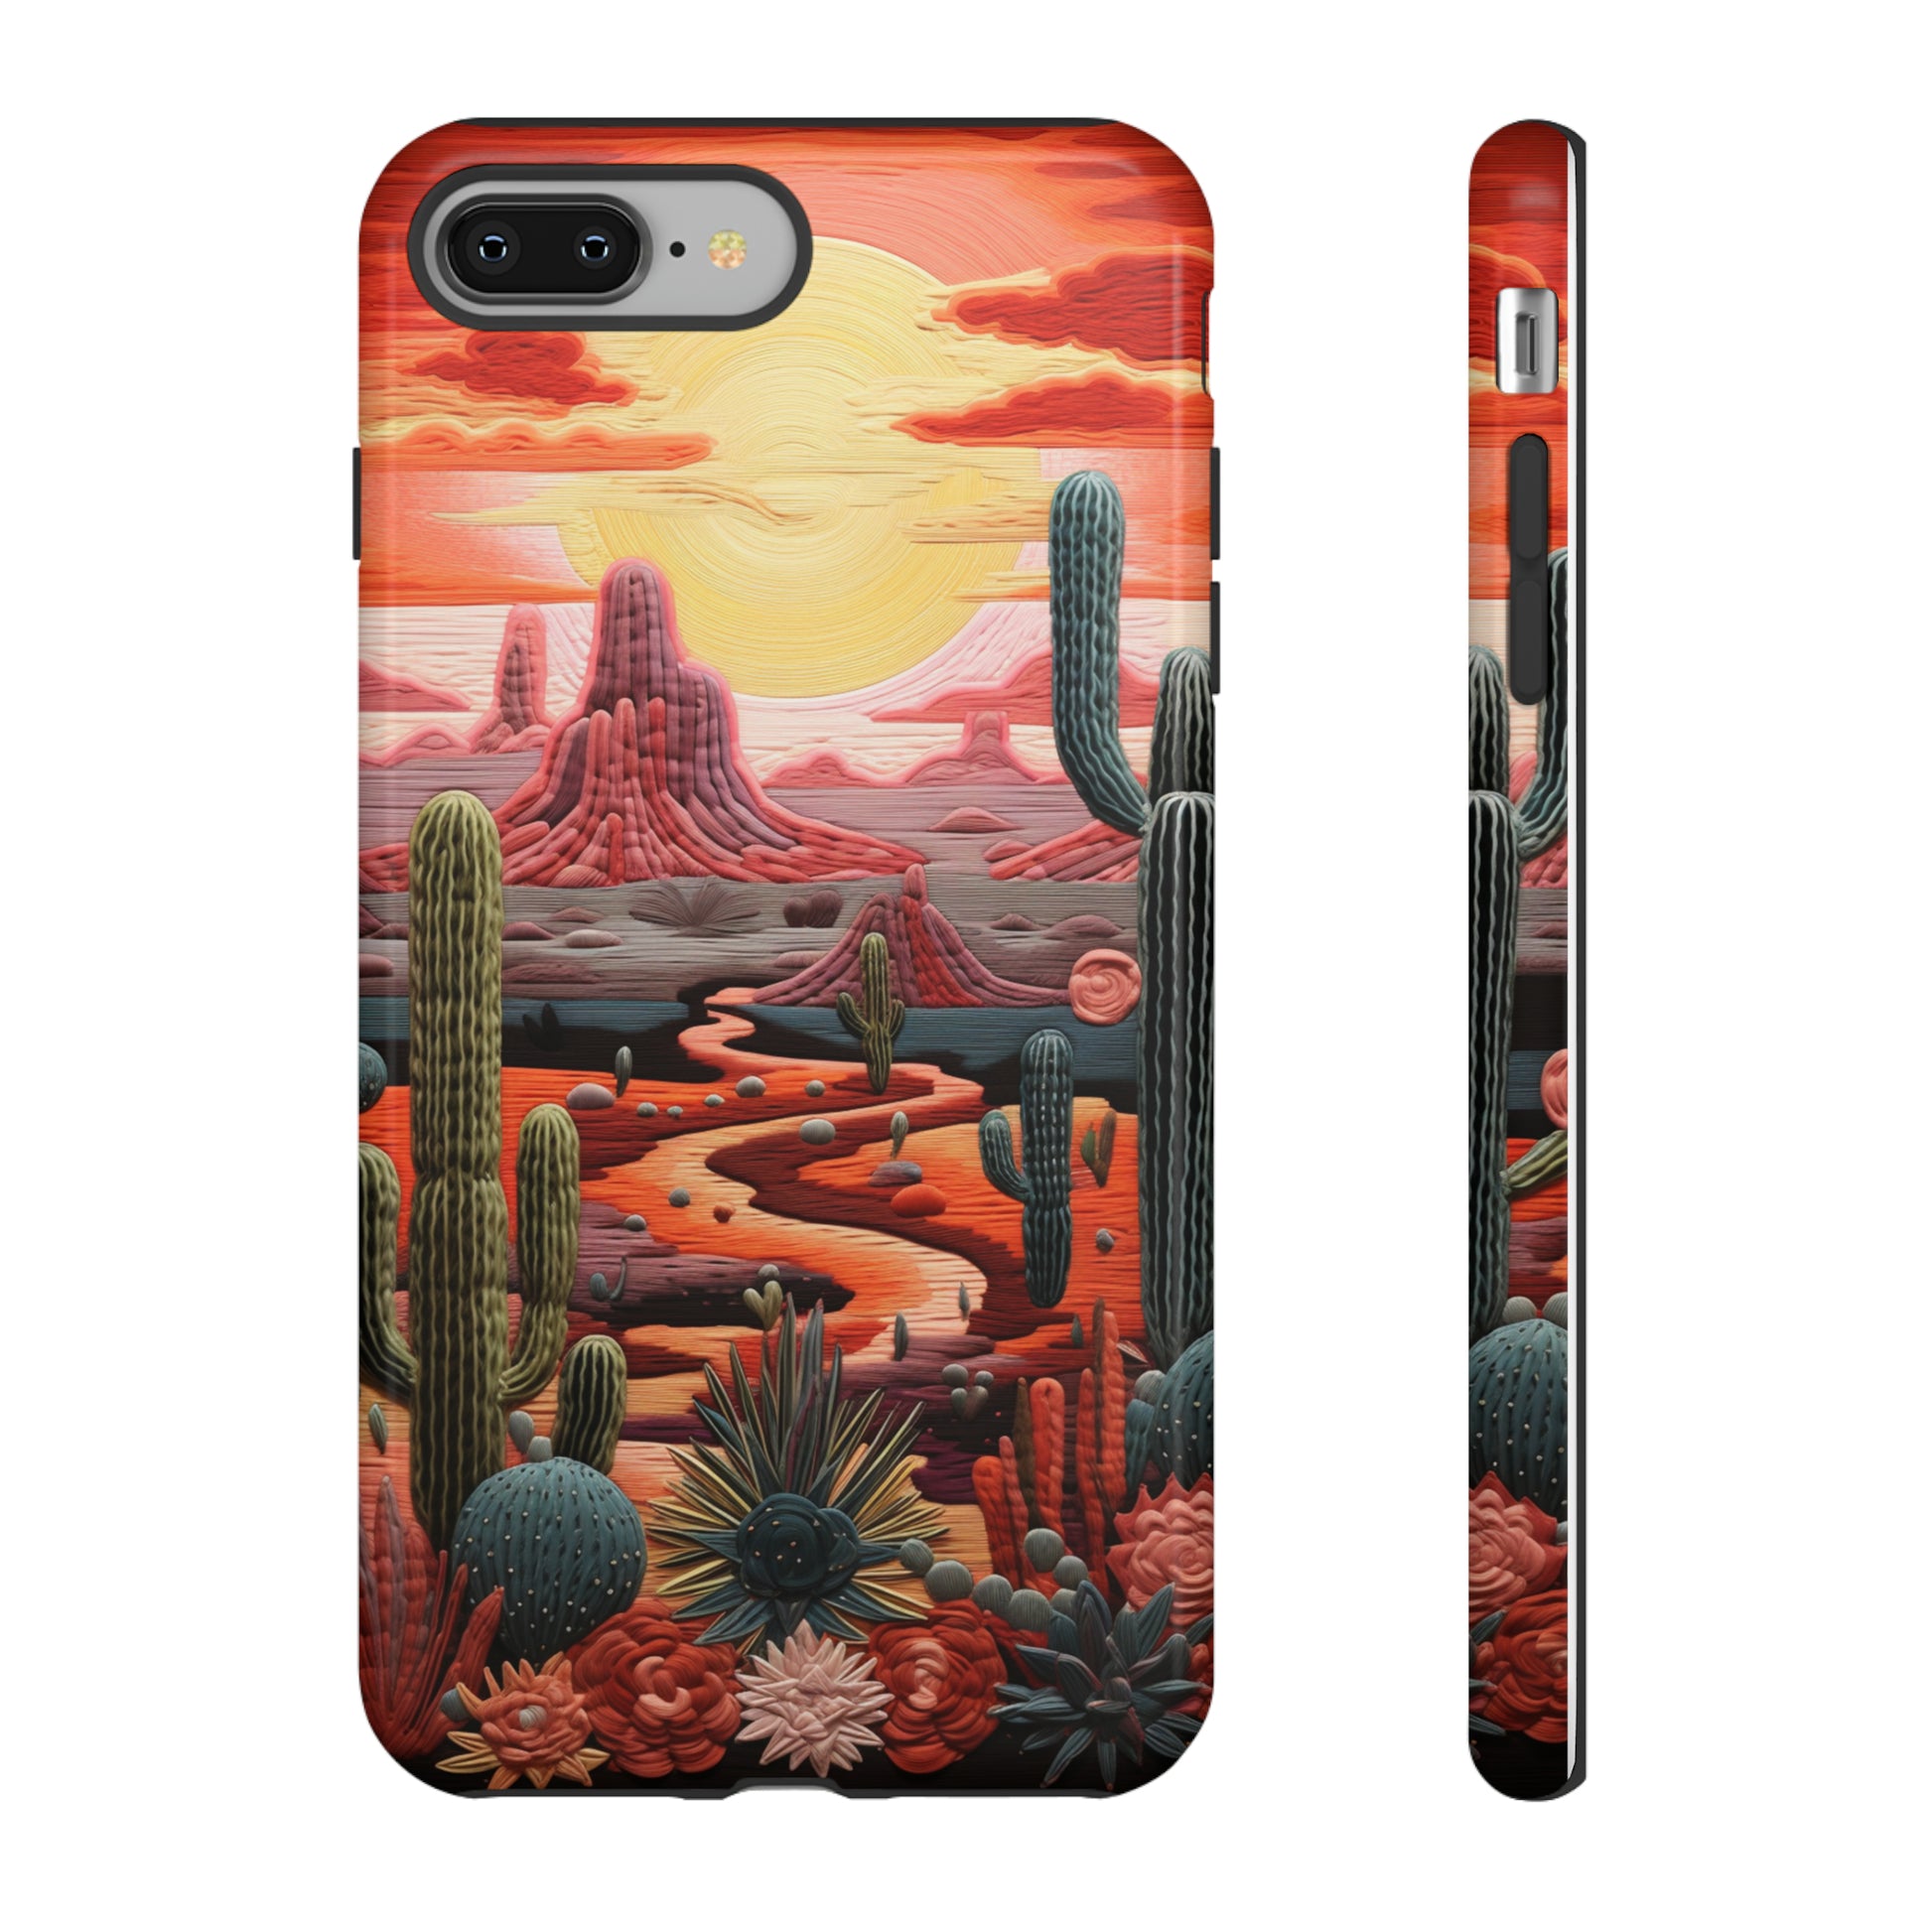 Southwestern landscape embroidery case for iPhone 8